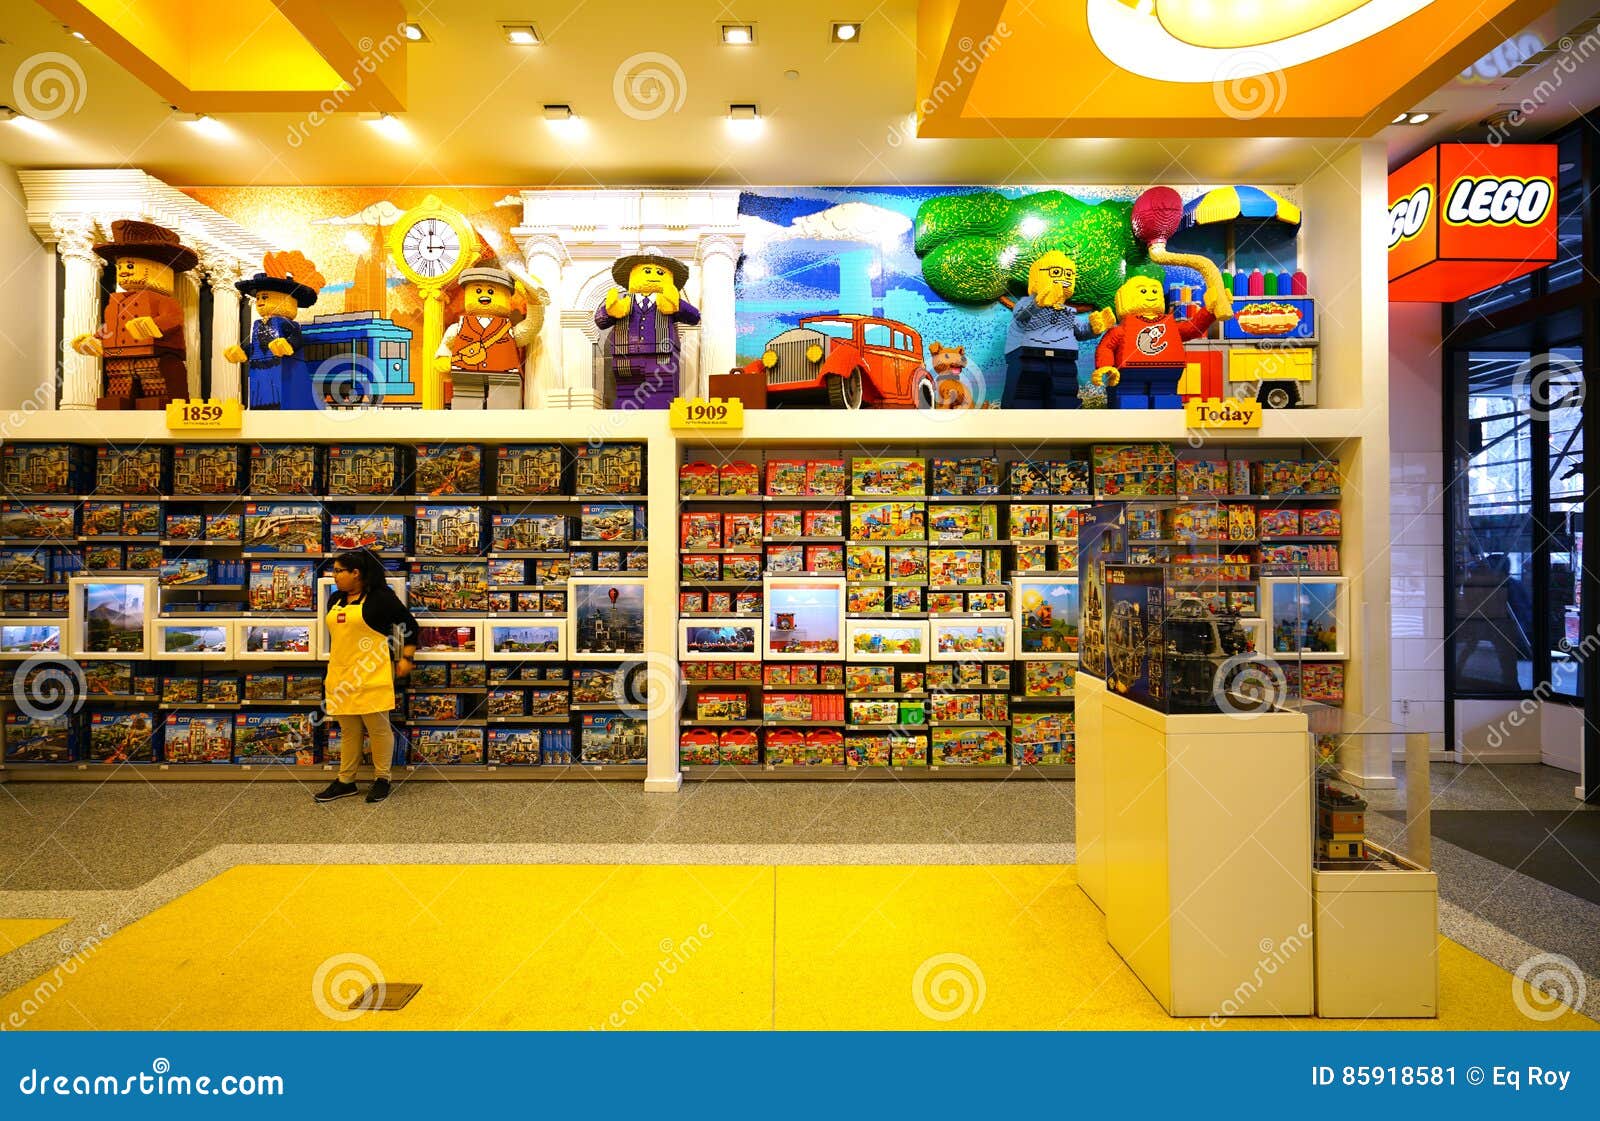 Inside the Lego Store in Rockefeller Center in New York City Editorial Photo - Image of manhattan: 85918581